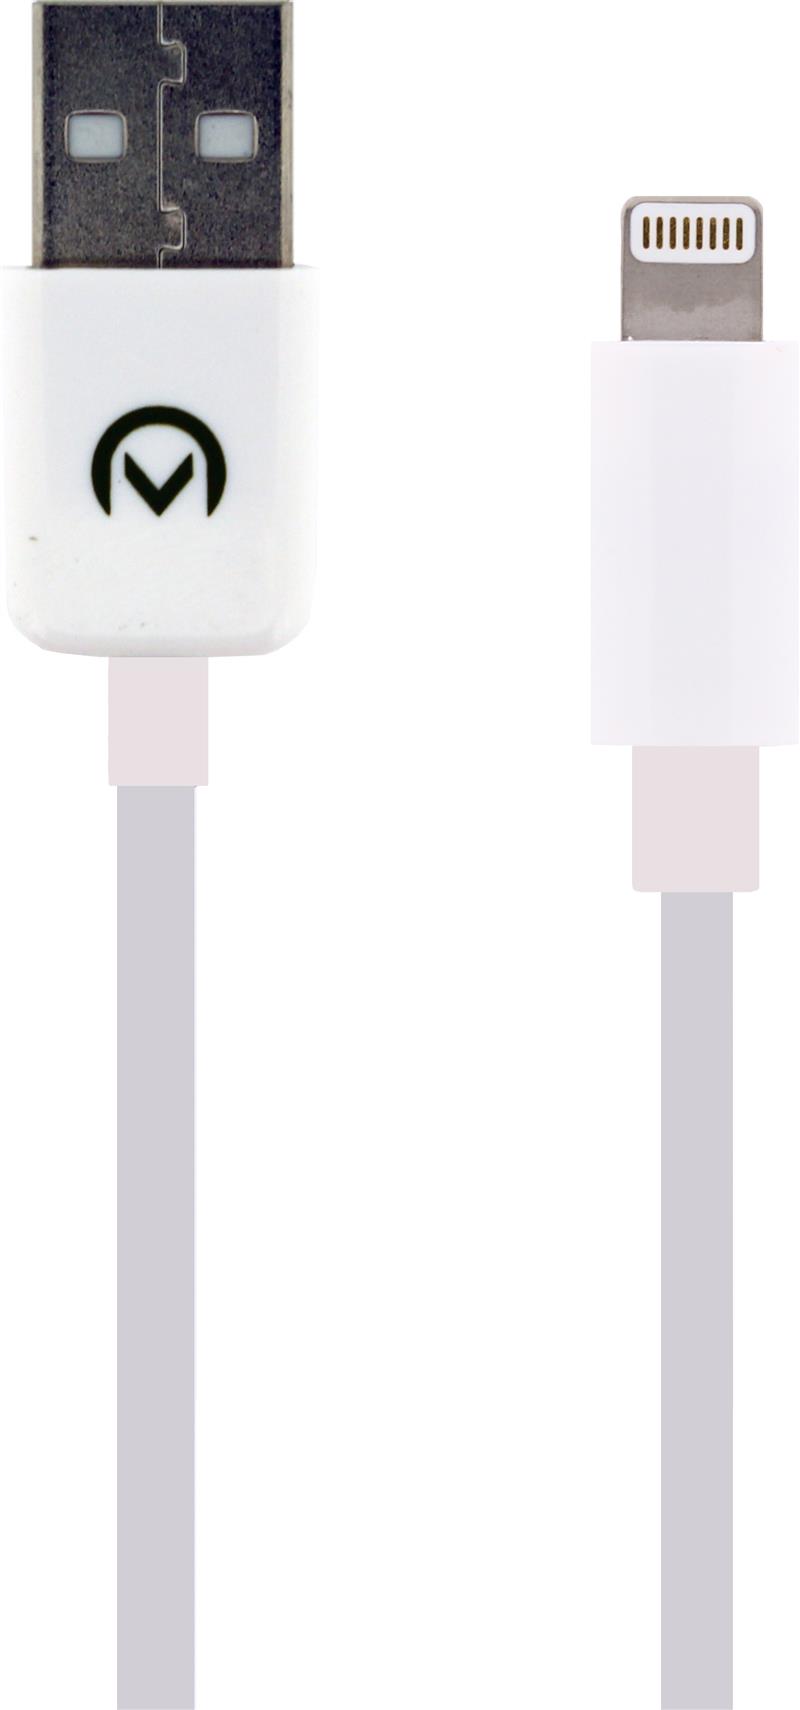 Mobilize Cable USB to Apple MFi Lightning 1m 12W White